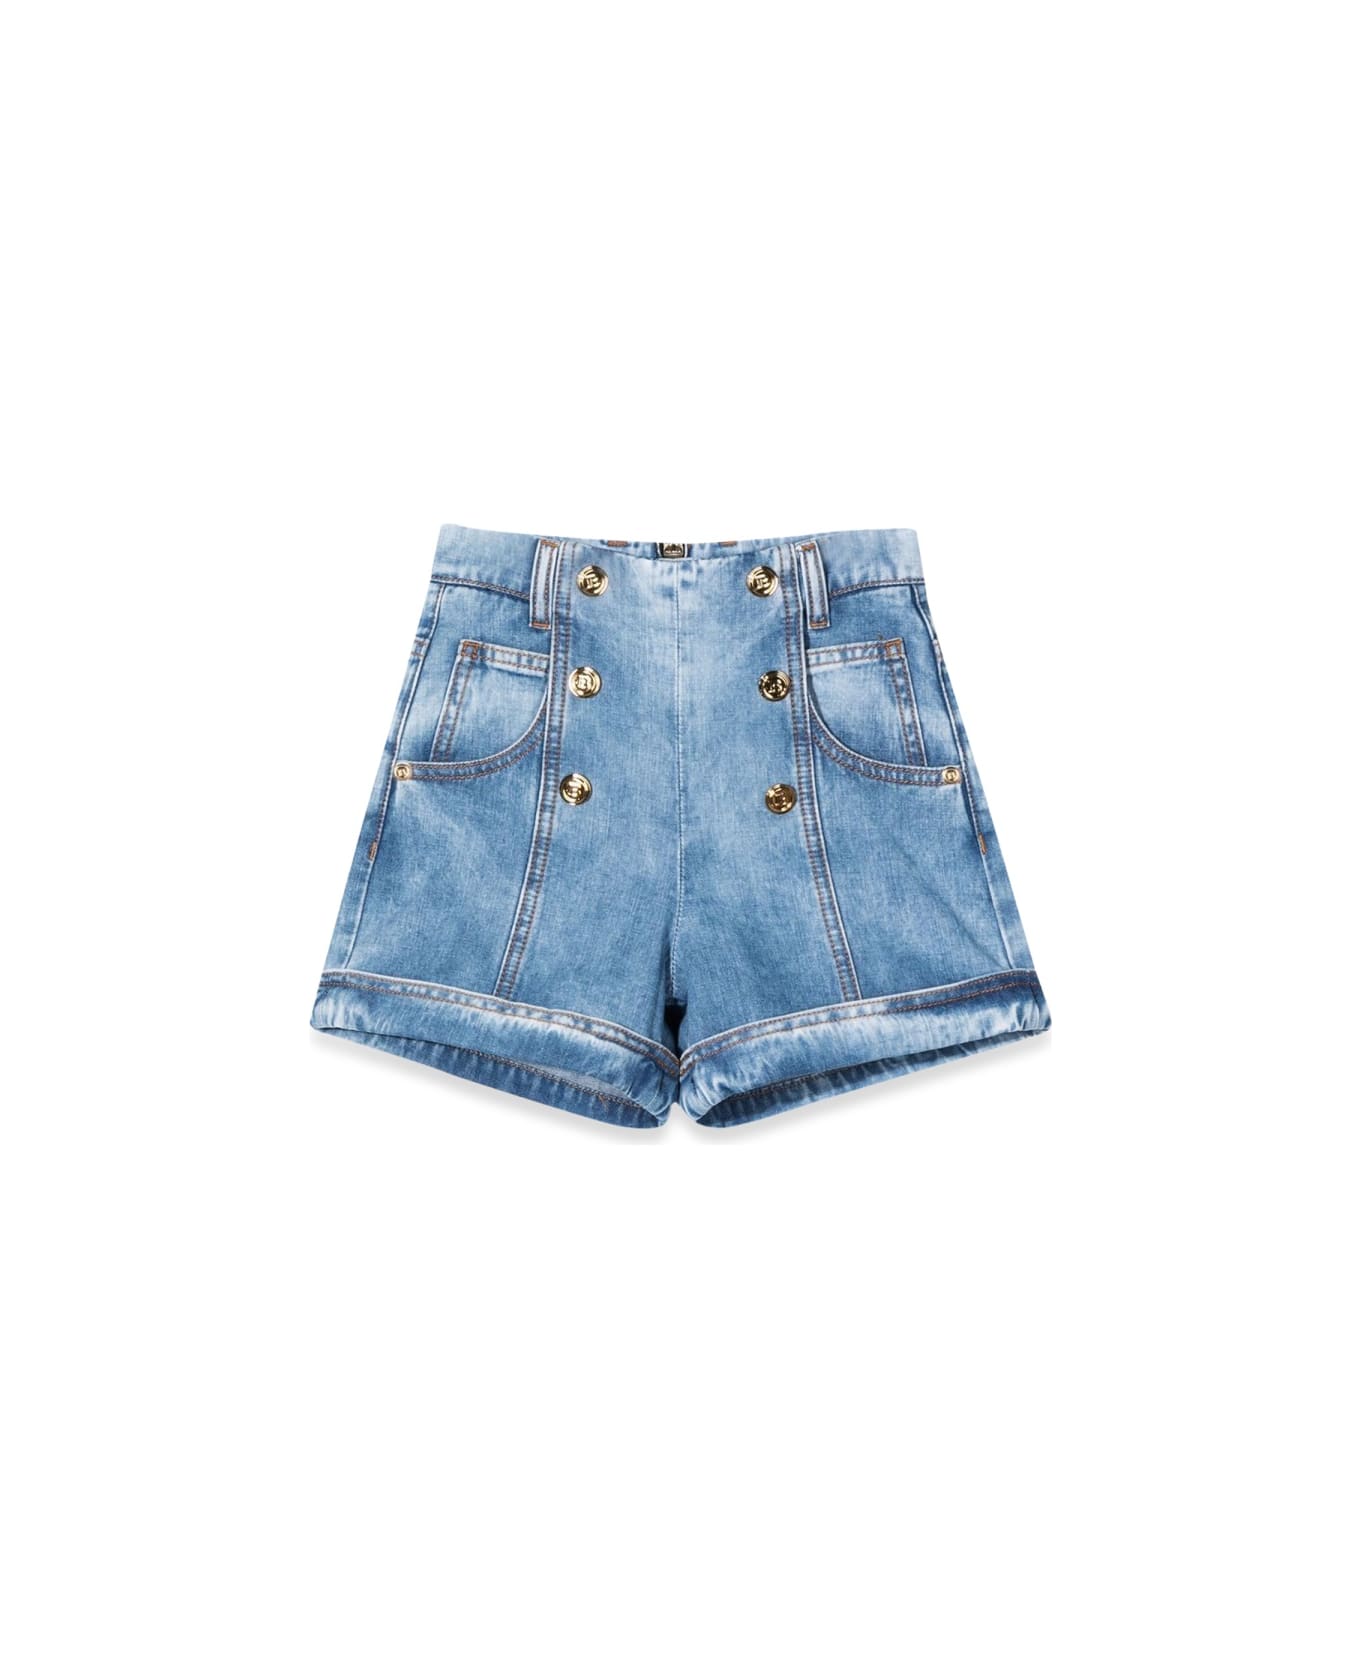 Balmain Short Shorts With Gold Buttons - AZURE ボトムス